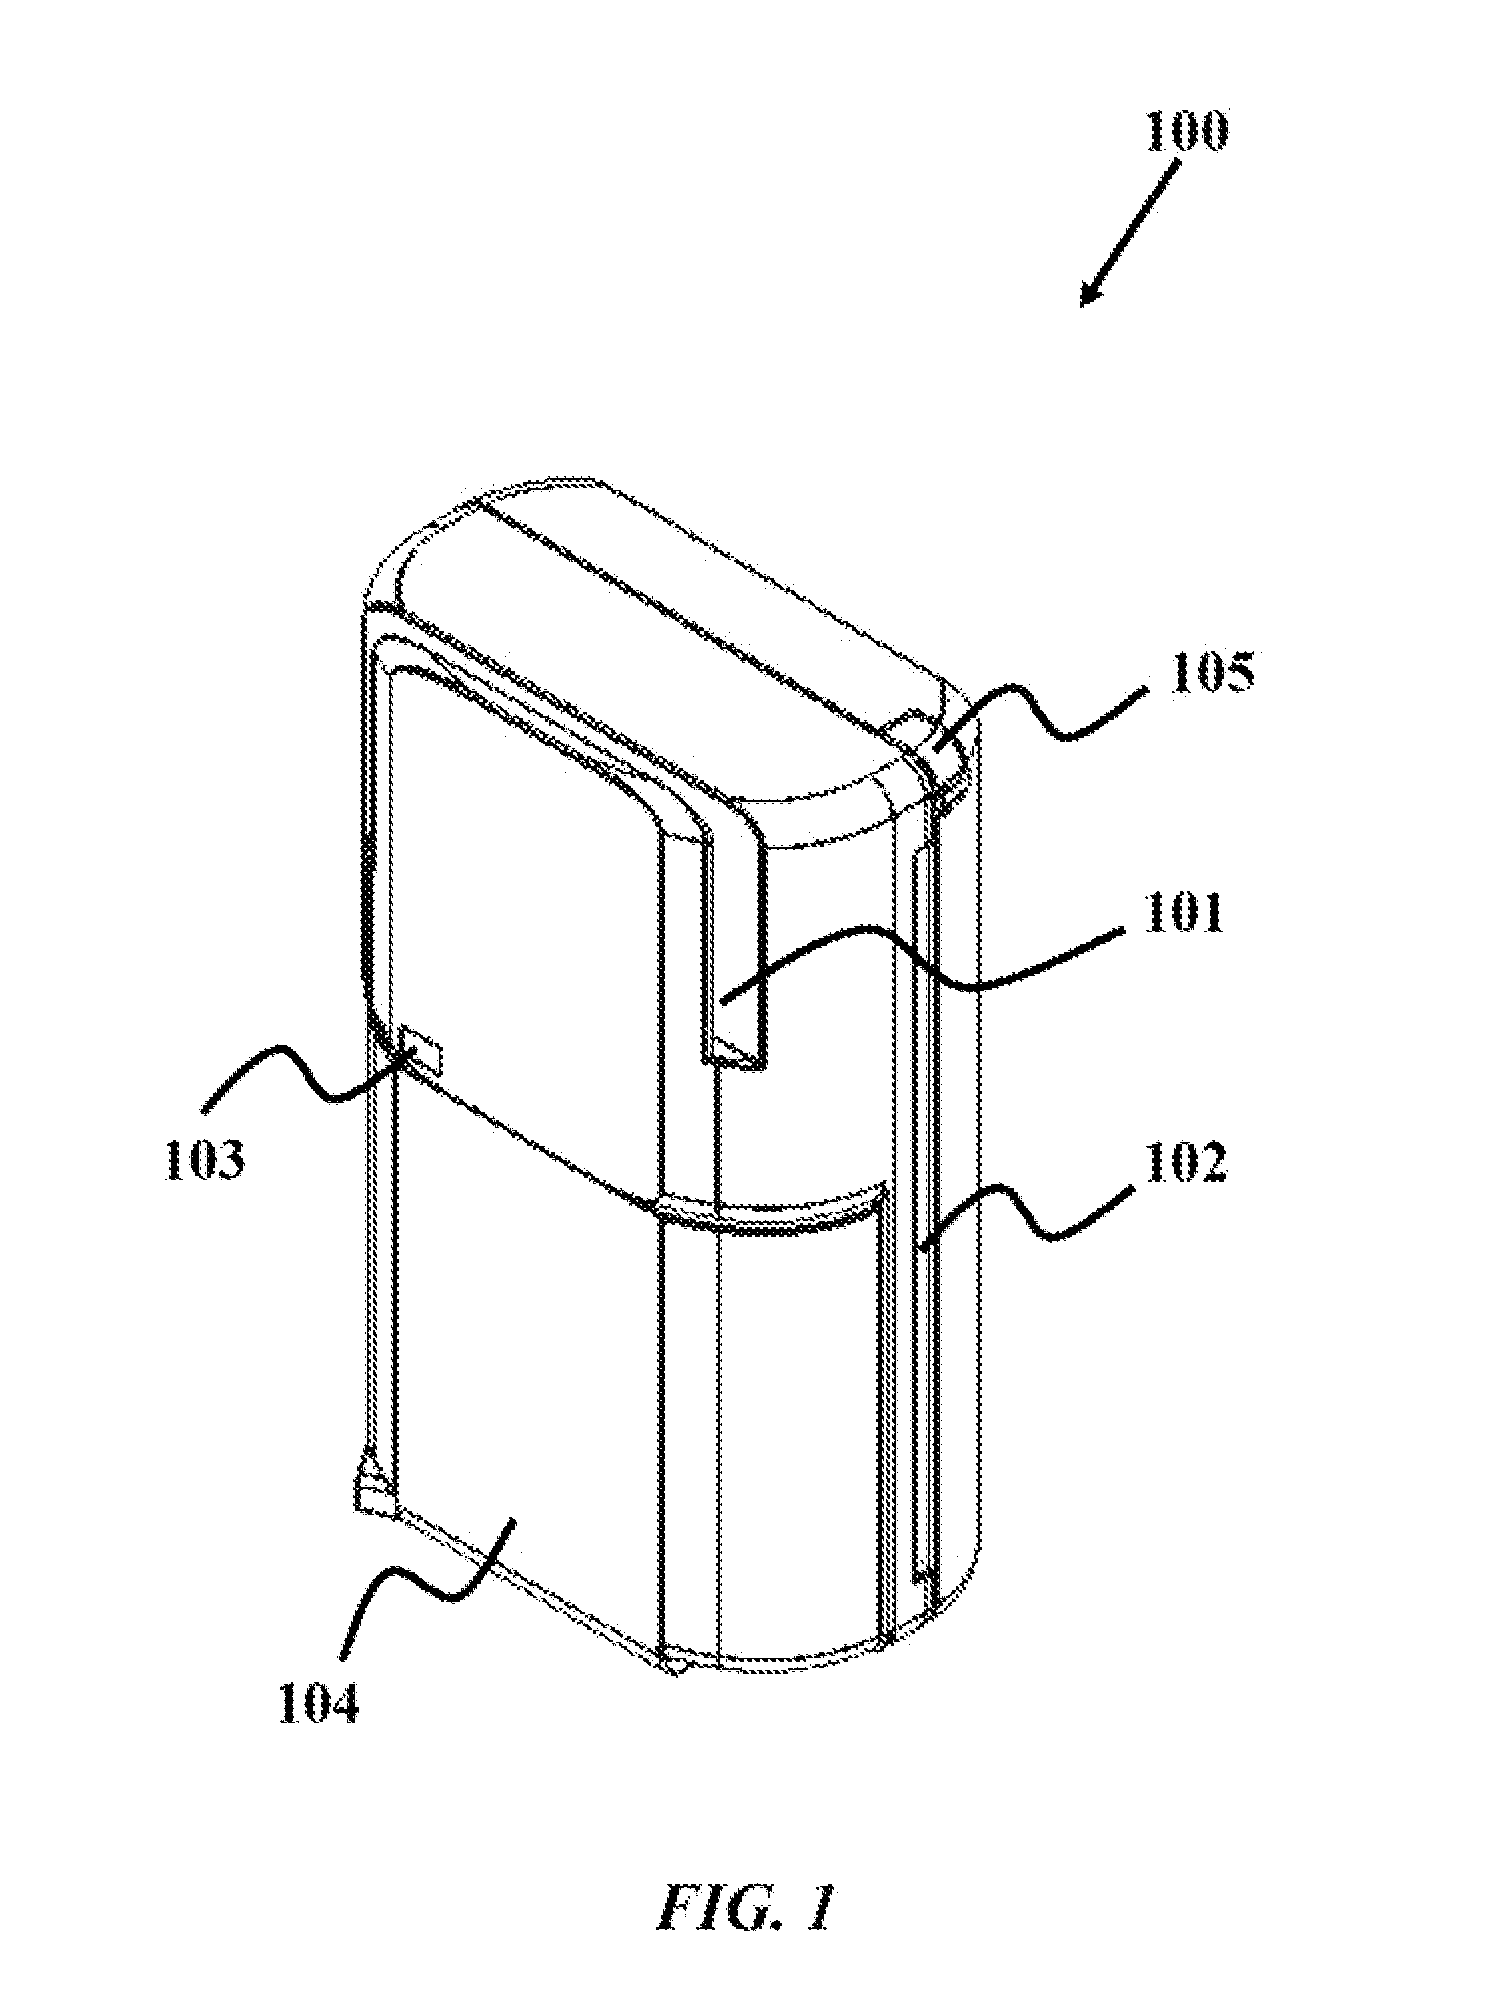 Dongle device with tamper proof characteristics for a secure electronic transaction